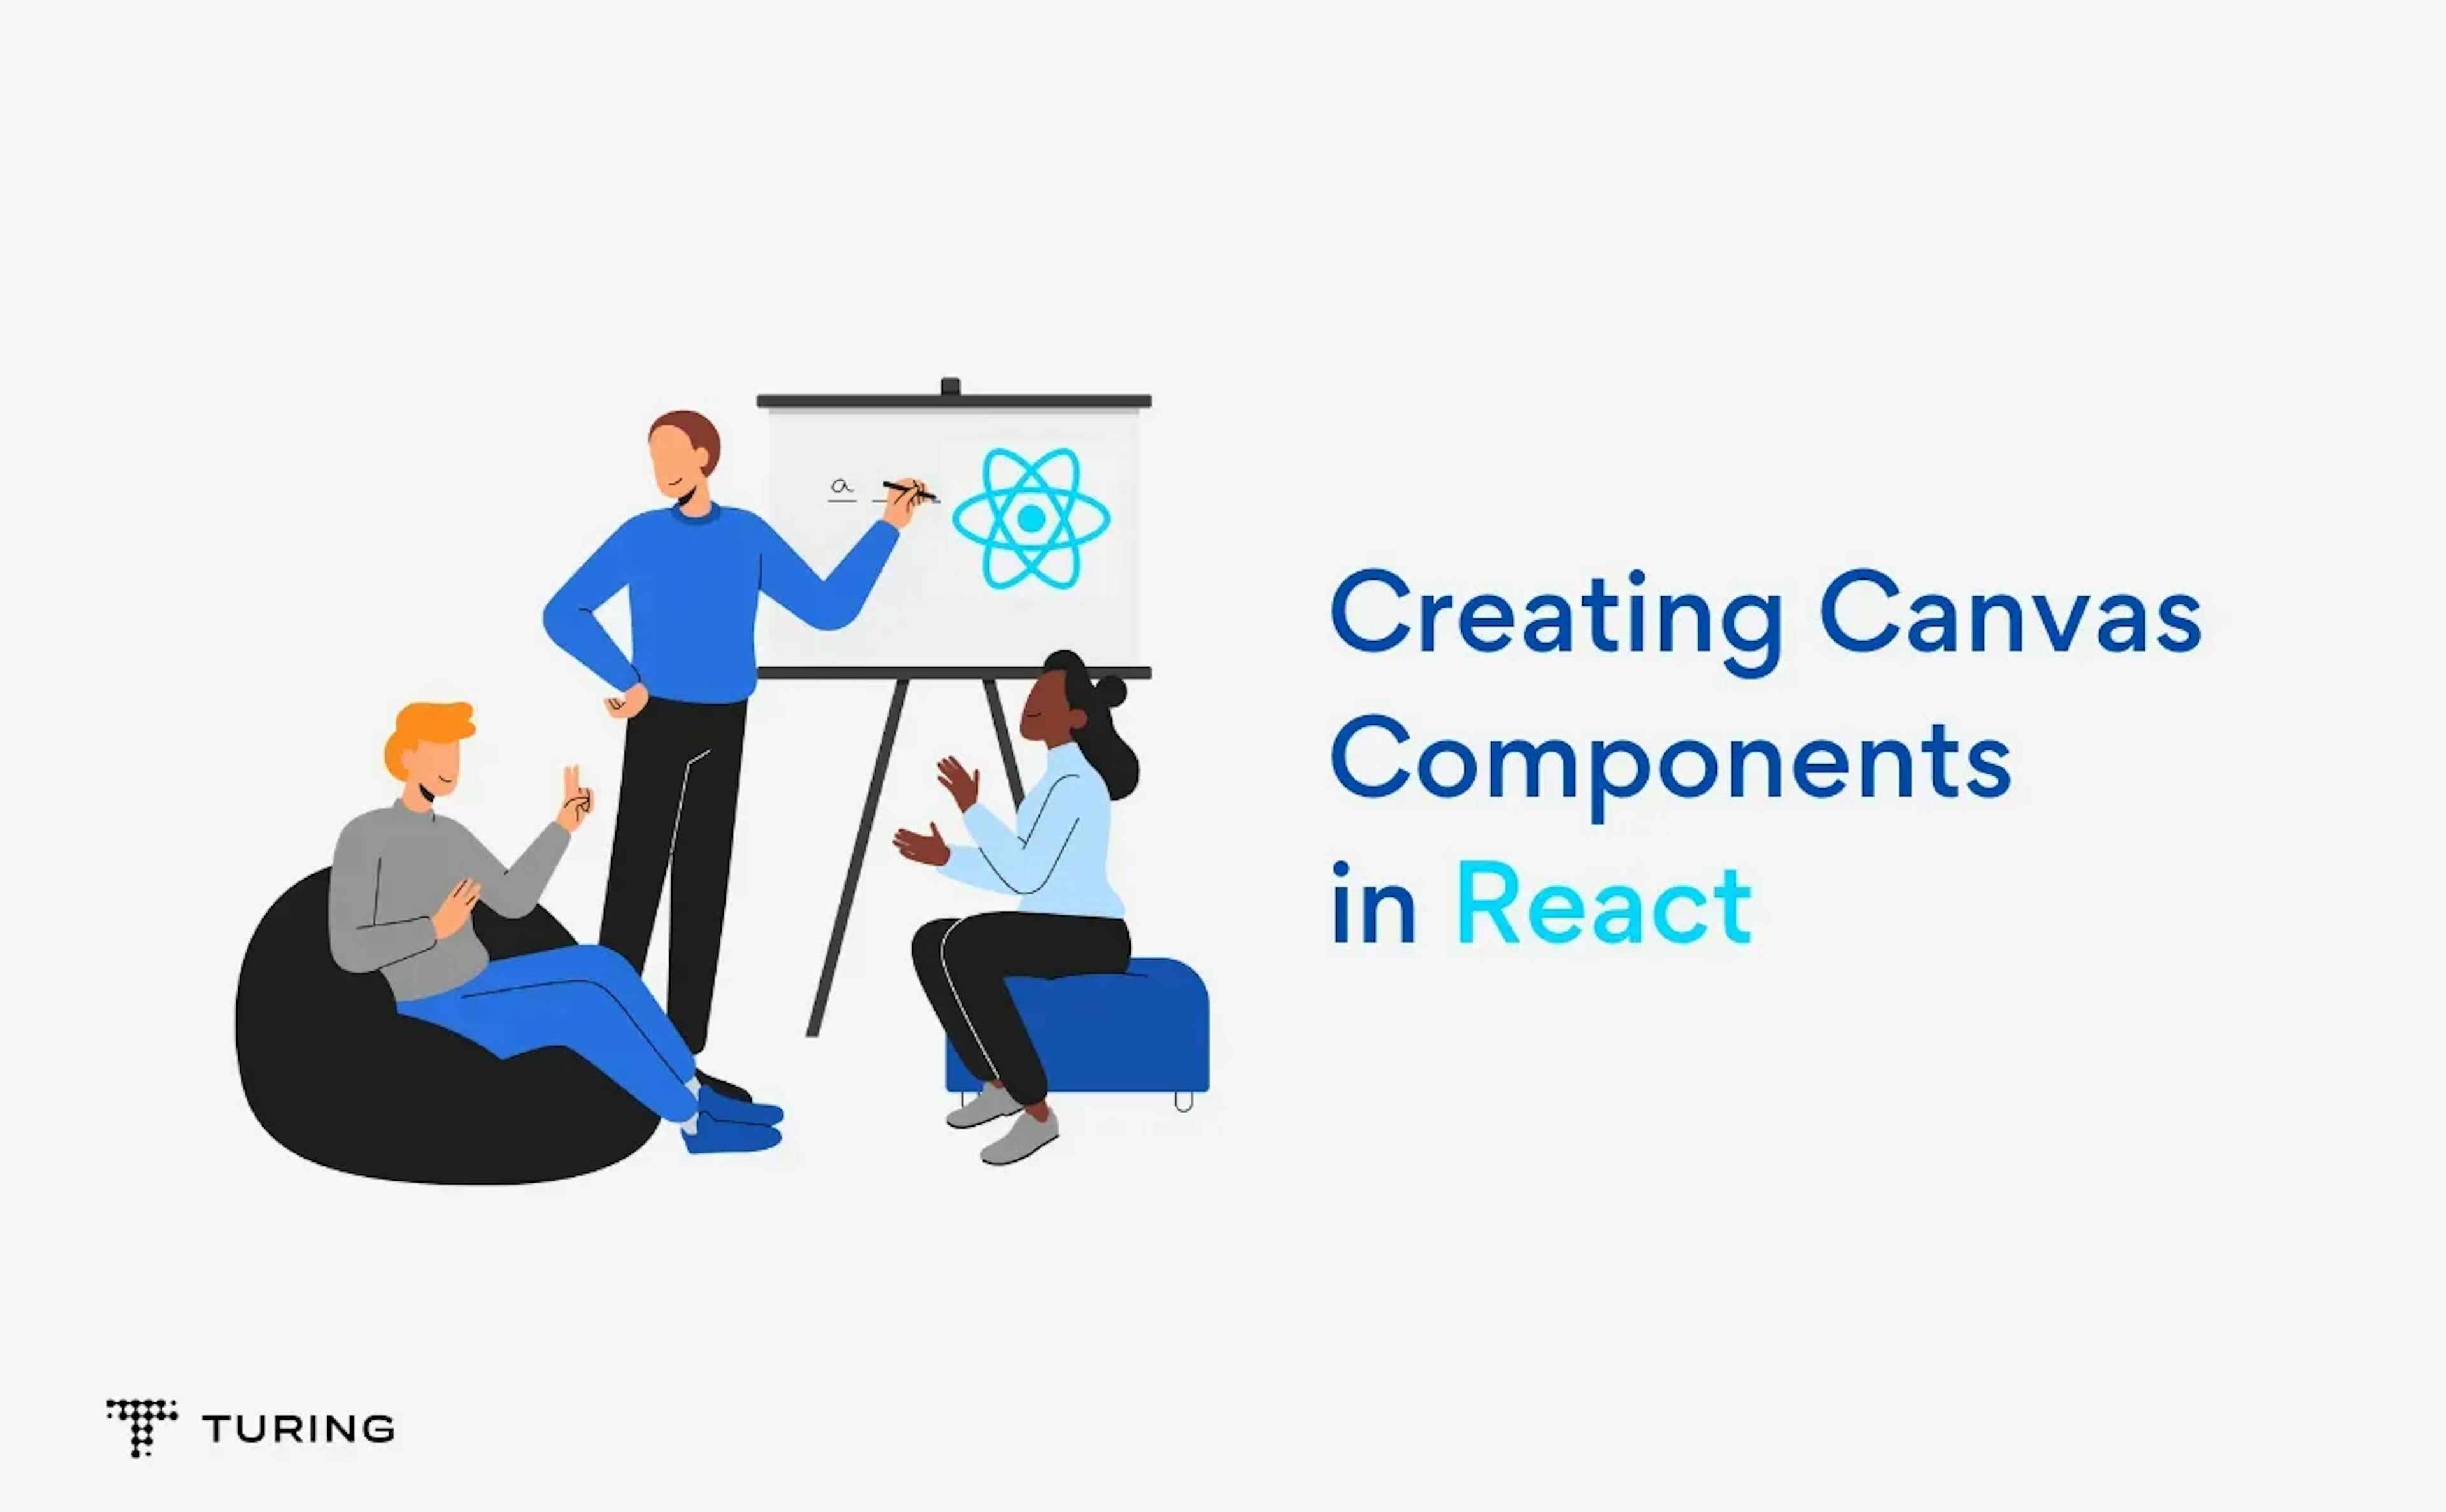 Creating Canvas Components in React